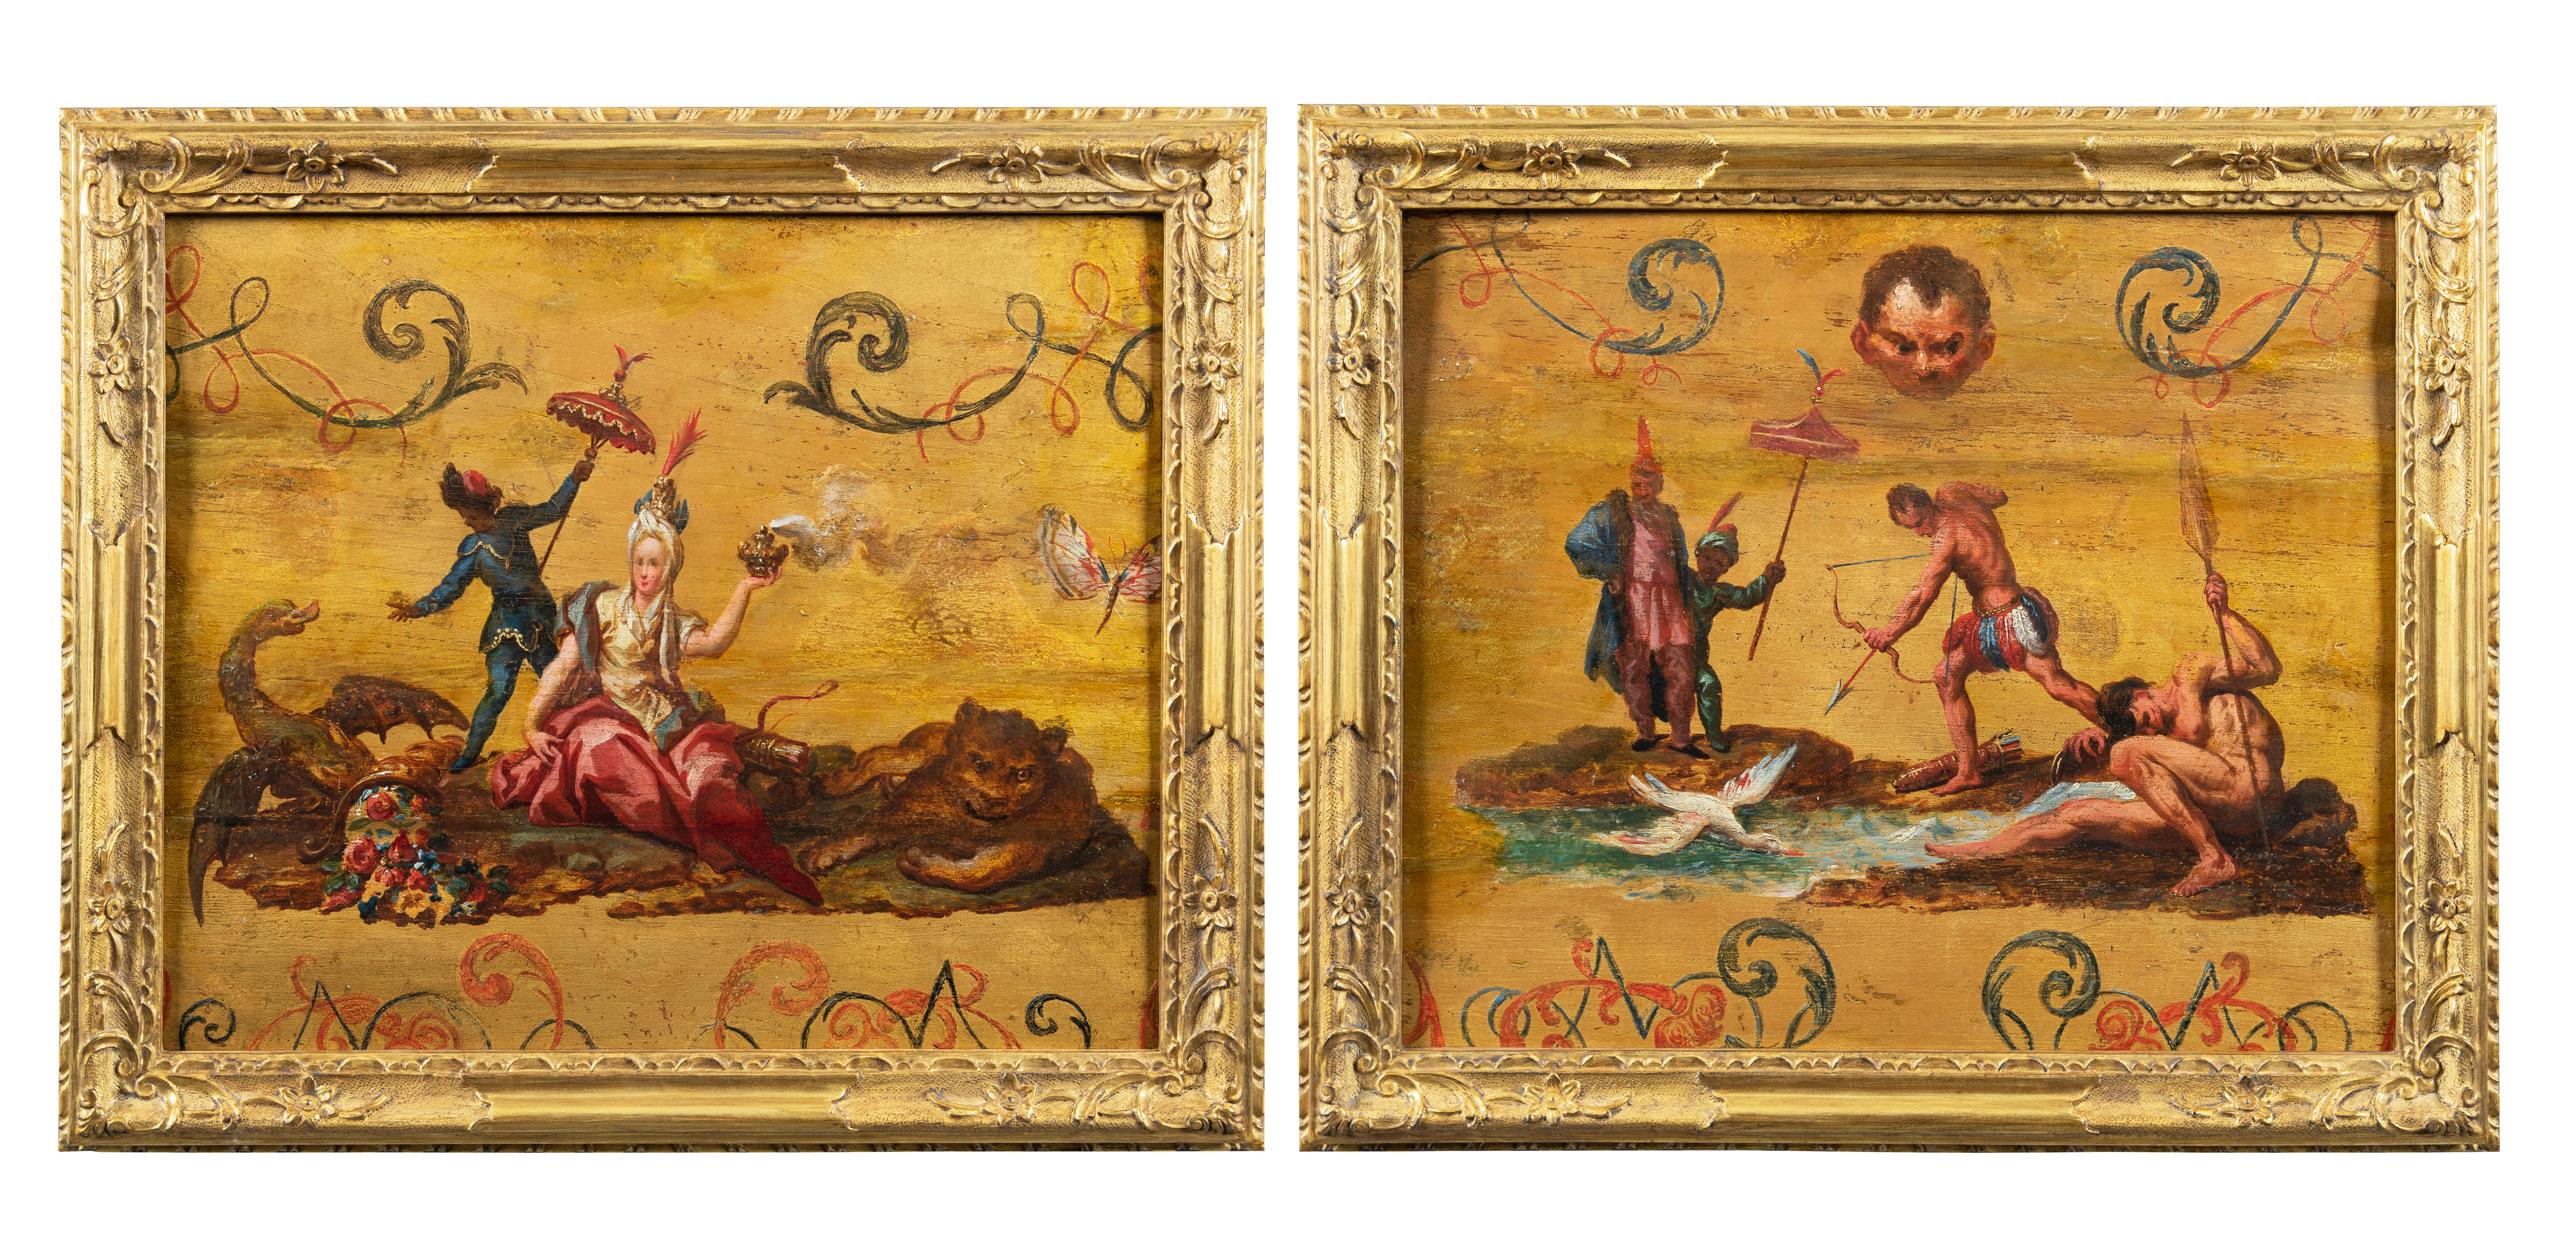 Pair of 18th century Italian paintings - Africa America allegory - Oil on panel